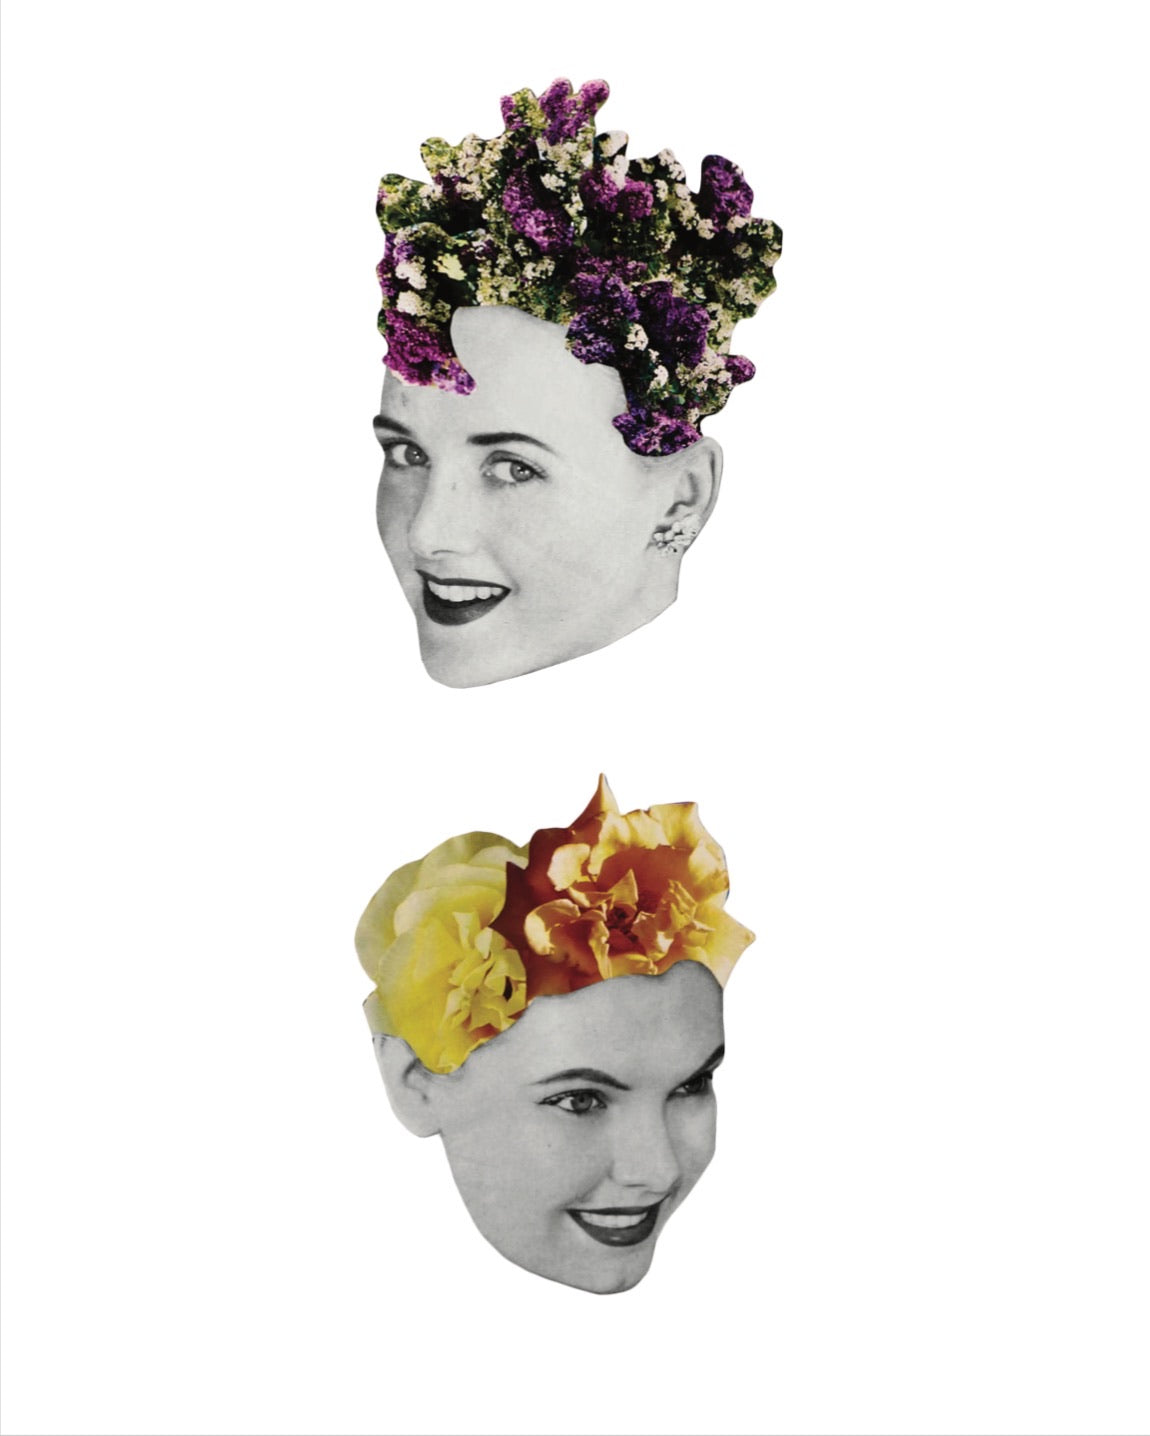 Art Print | 8x10 Collage | Flowers in Her Hair